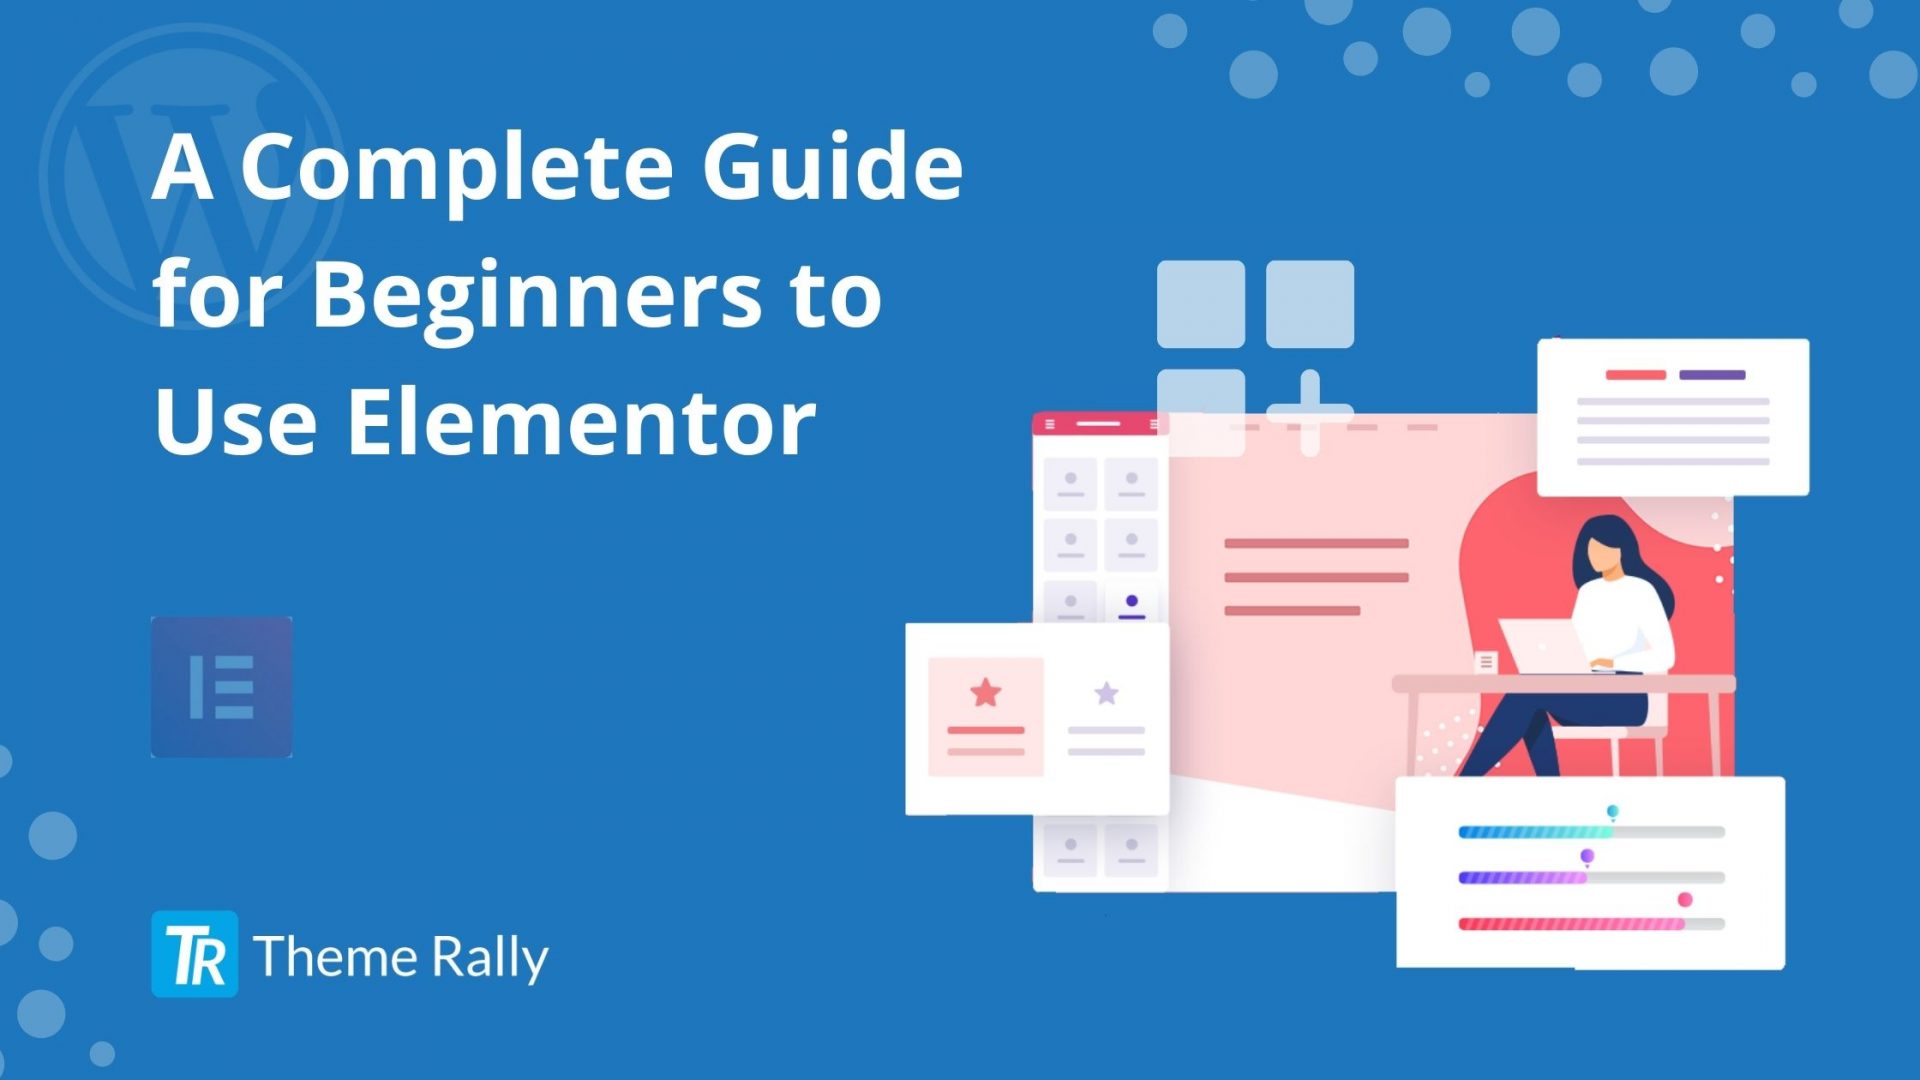 A Complete Guide for Beginners to Use Elementor